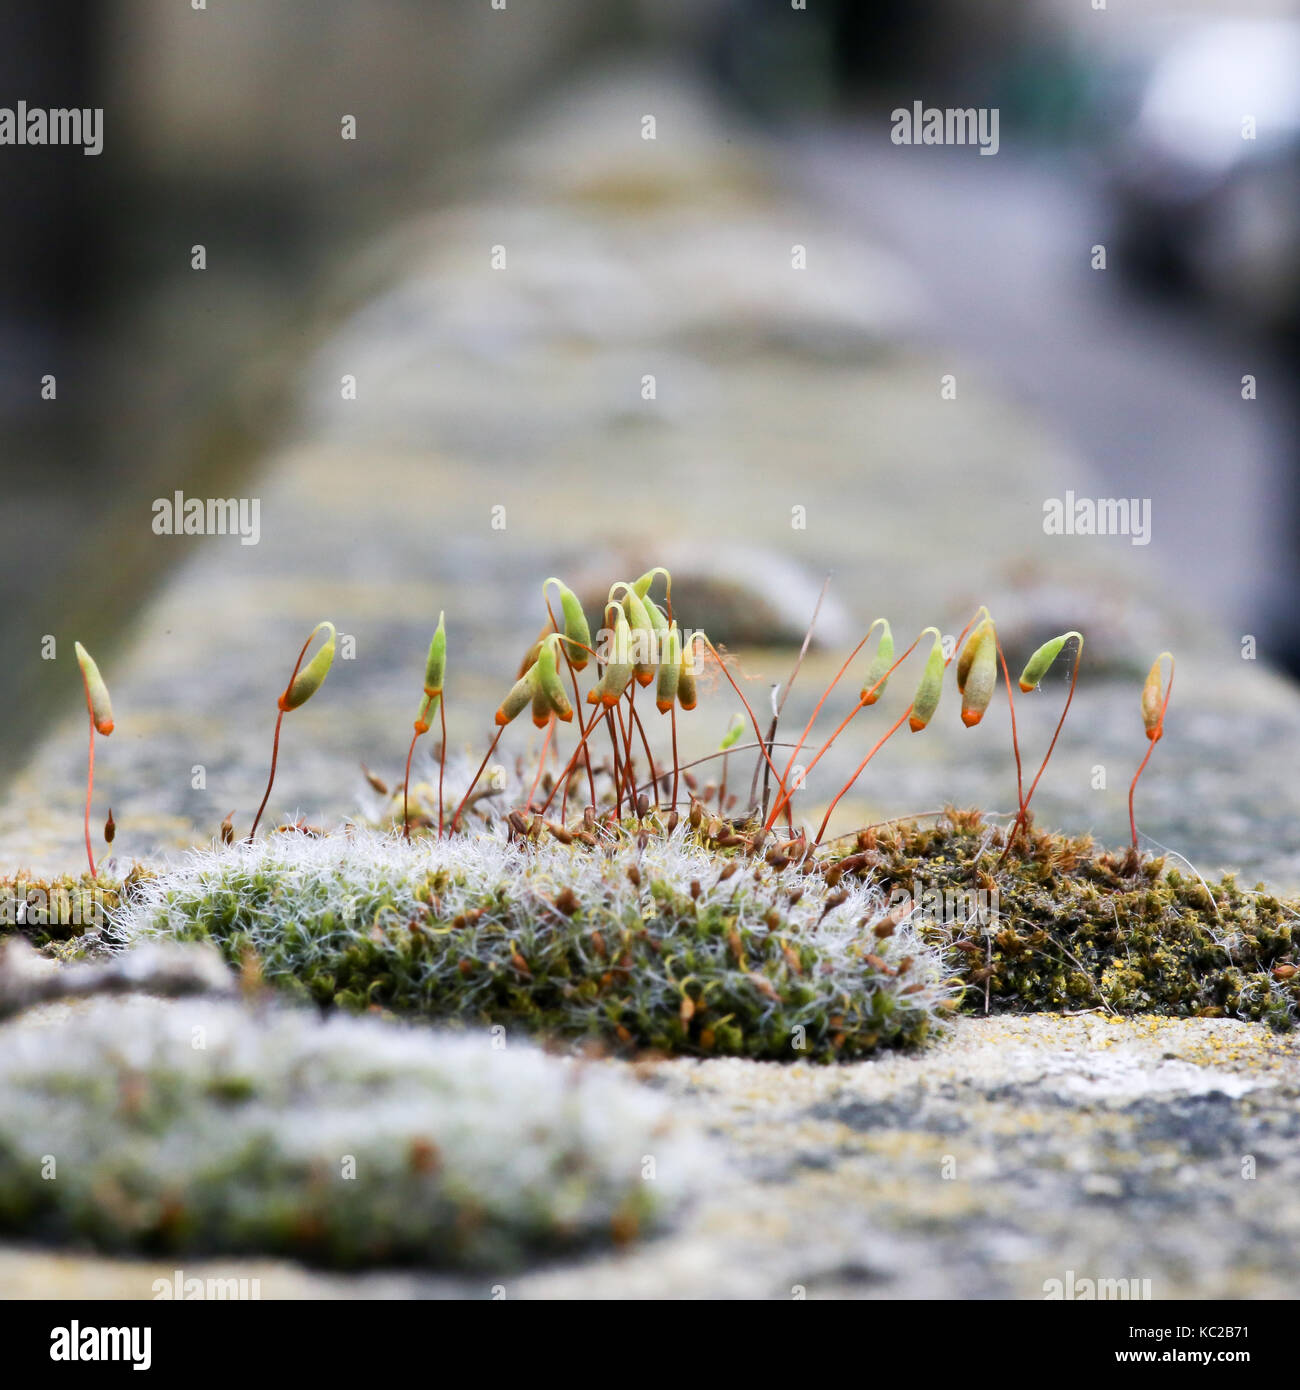 Moss green spore capsules on red stalks on sandstone wall blurred background Stock Photo